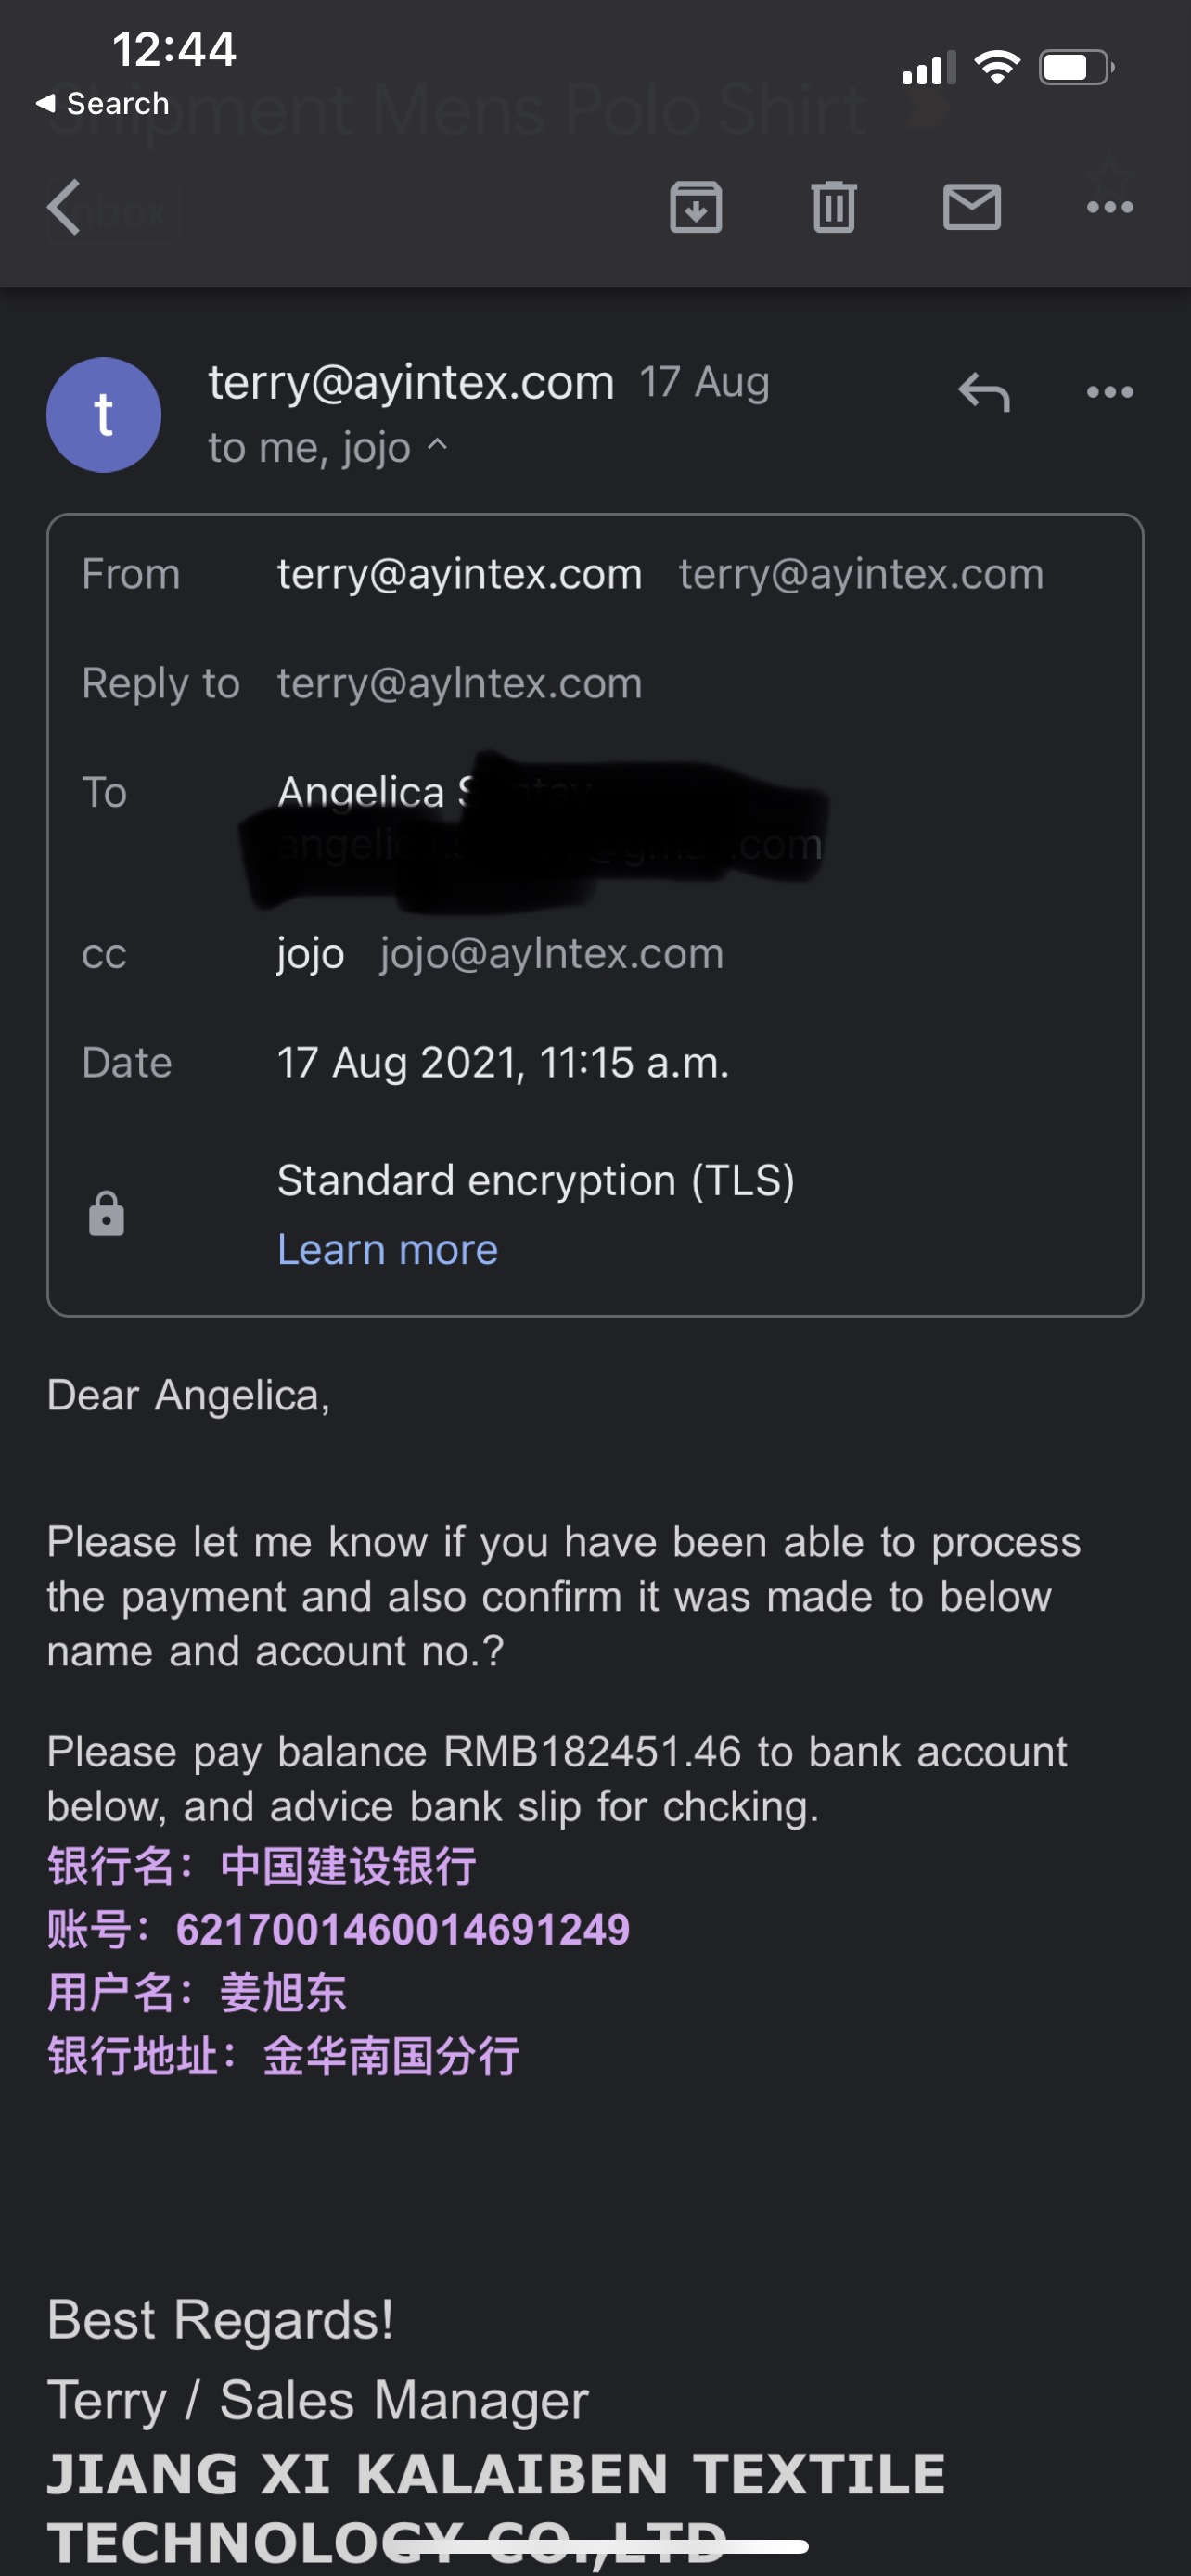 email stating the account number